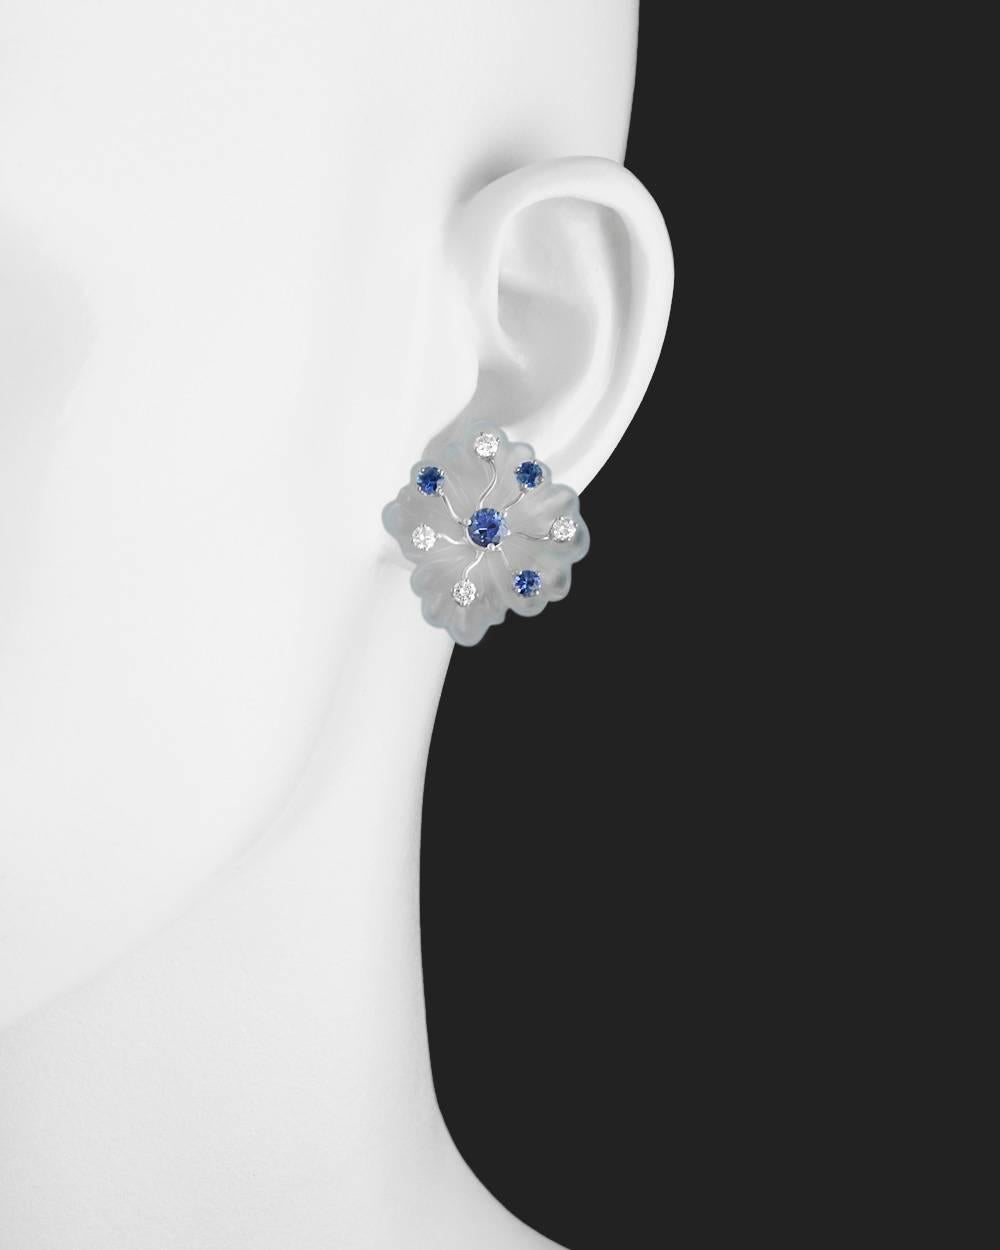 Carved chalcedony stylized flower earclips, accented by round-cut sapphires and diamond, in 18k white gold, numbered 10257 and stamped Seaman Schepps. Eight sapphires weighing 1.77 total carats and eight diamonds weighing approximately 0.80 total